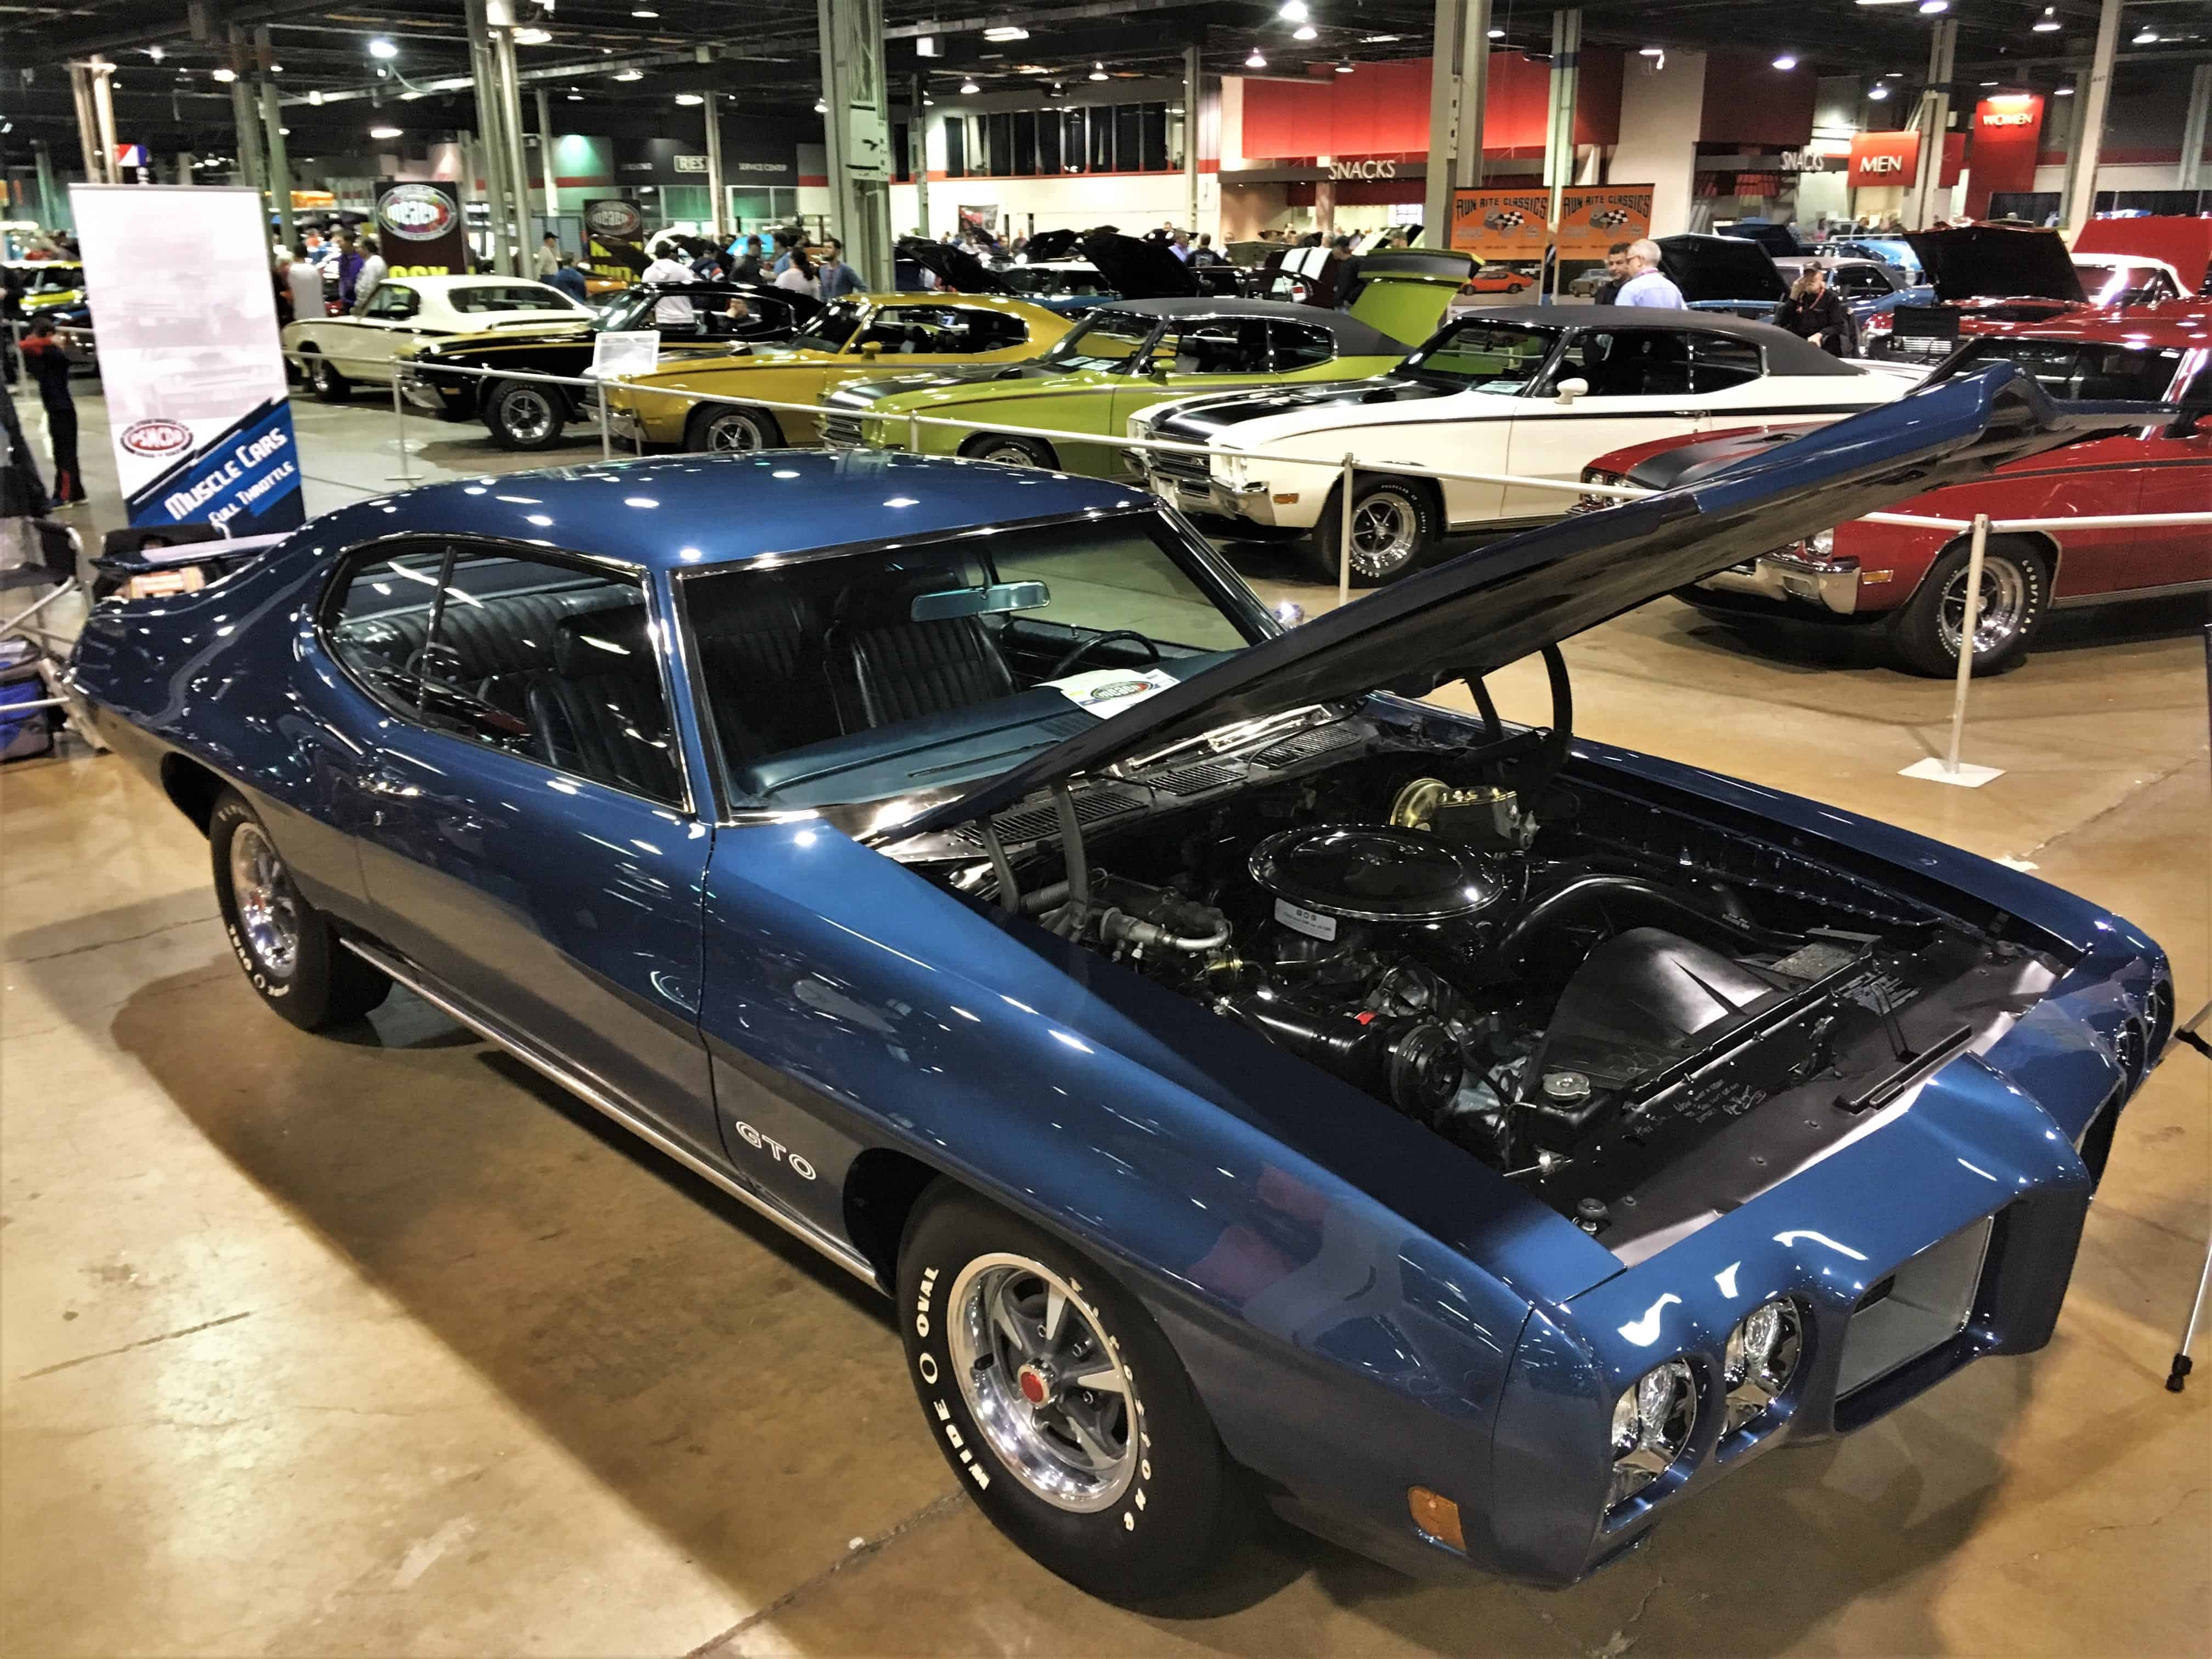 The amount of automotive eye candy on offer at the annual Muscle Car and Corvette Nationals made it extremely hard to pick 10 favorites, but I tried. | William Hall photos